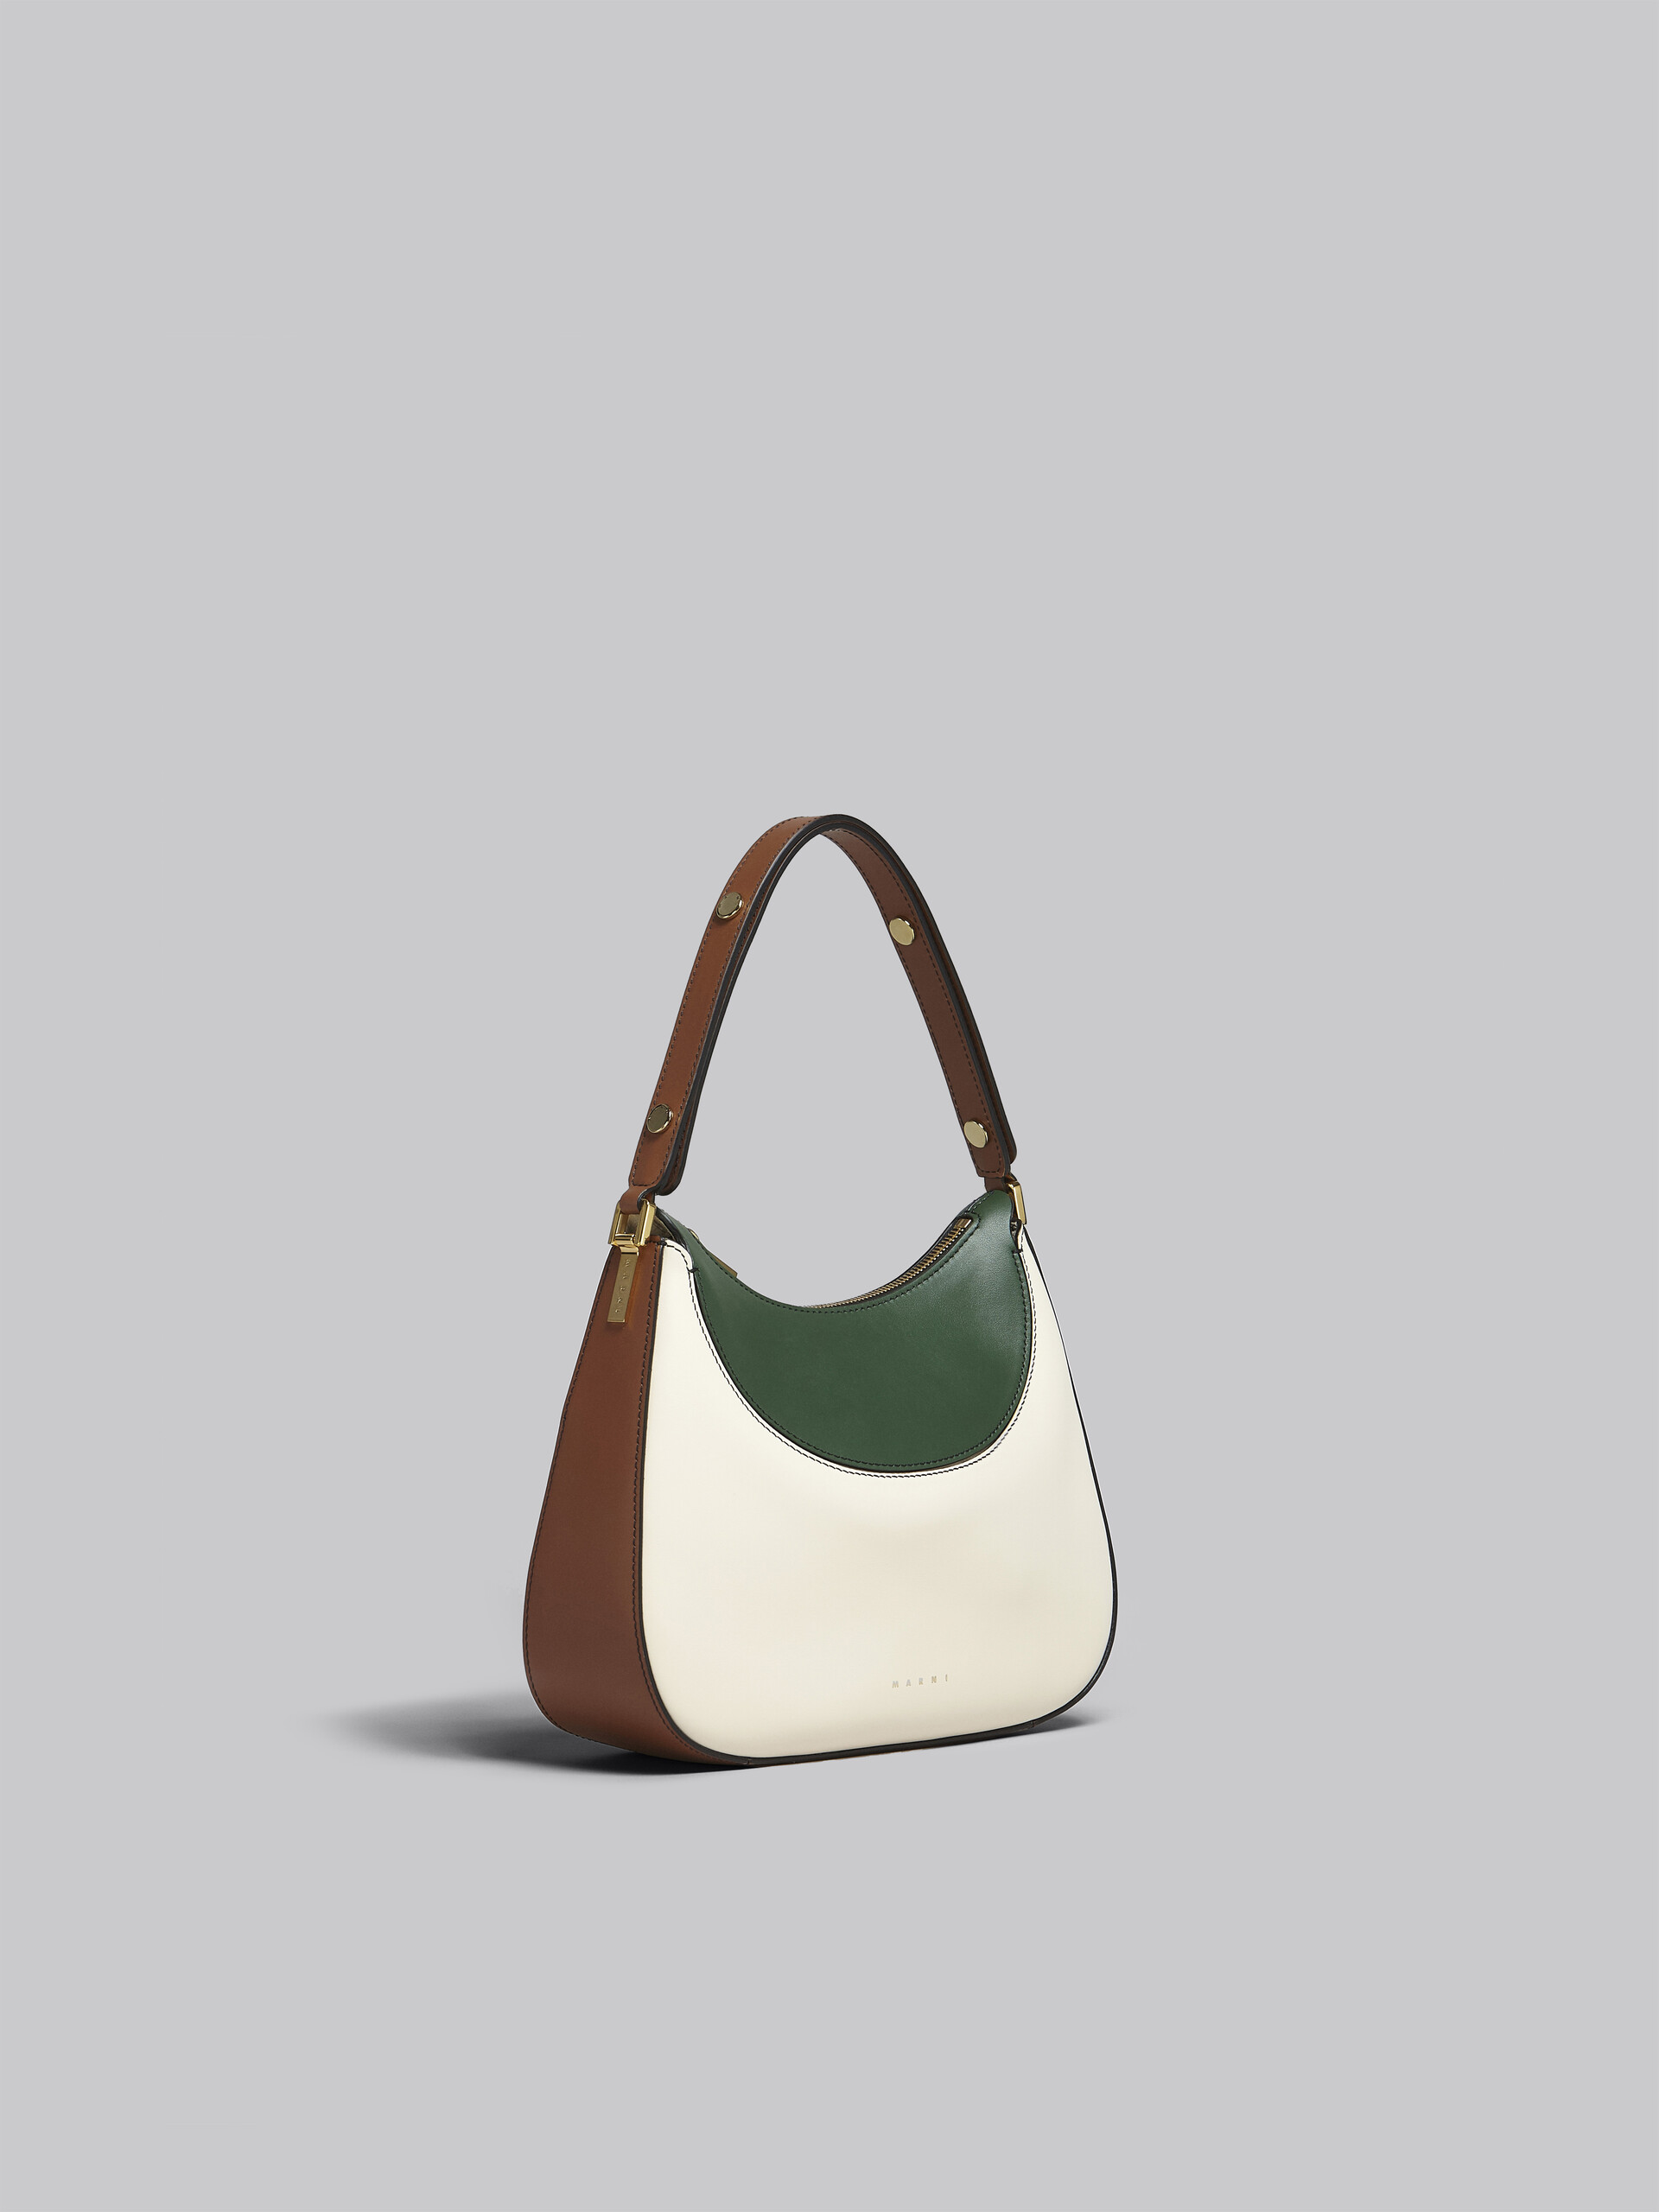 Milano small bag in white brown and green leather - Handbag - Image 6